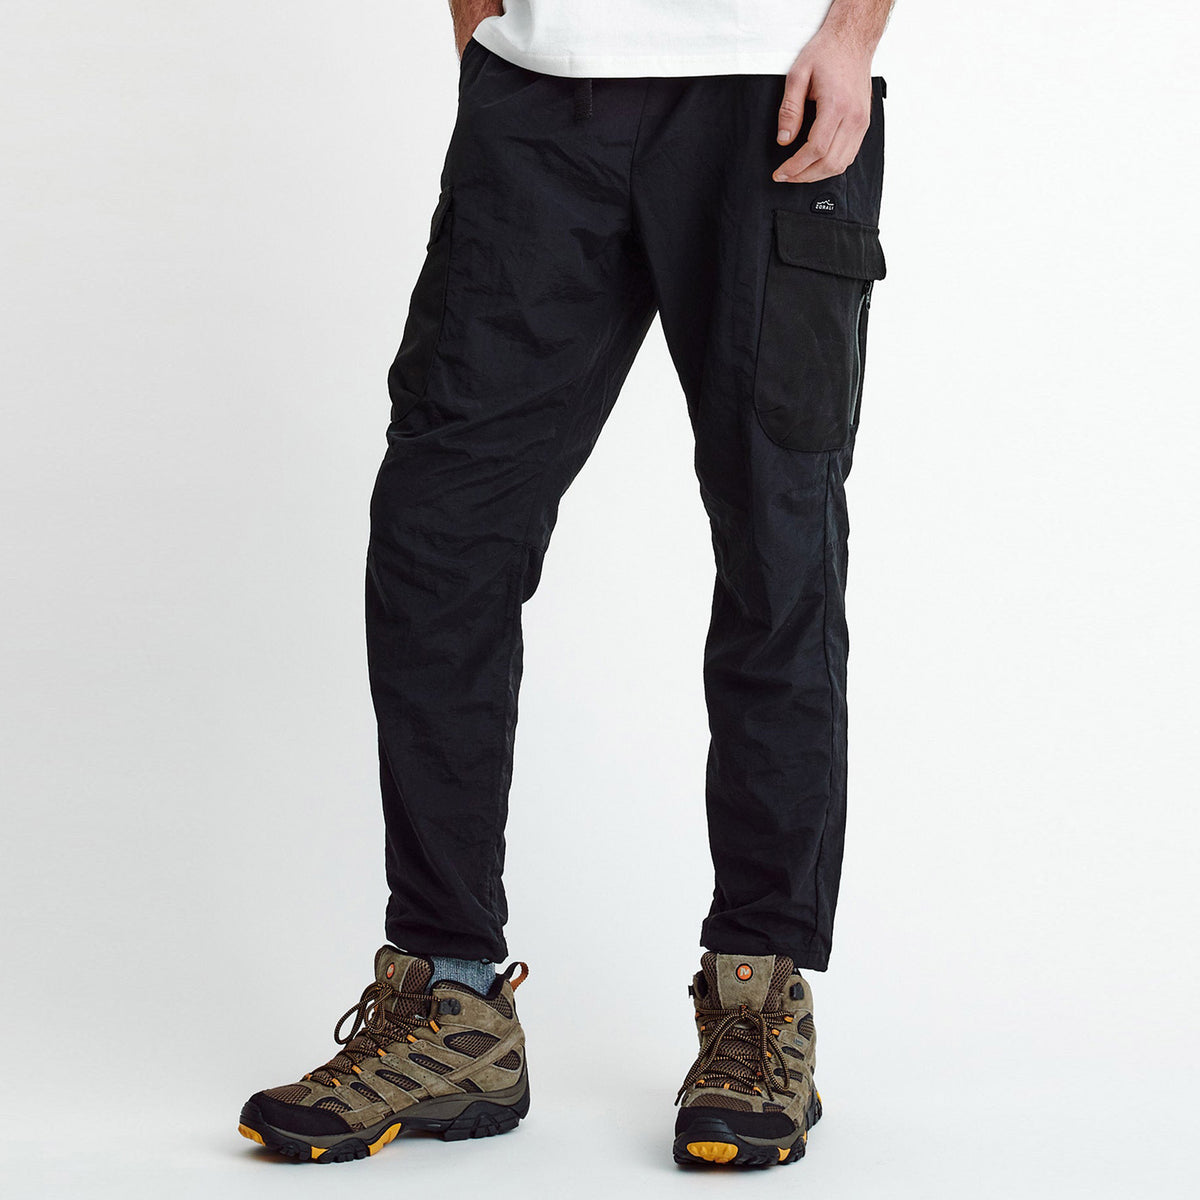 ZORALI Recycled Venture Pant is a Rugged Cargo for the Adventurous